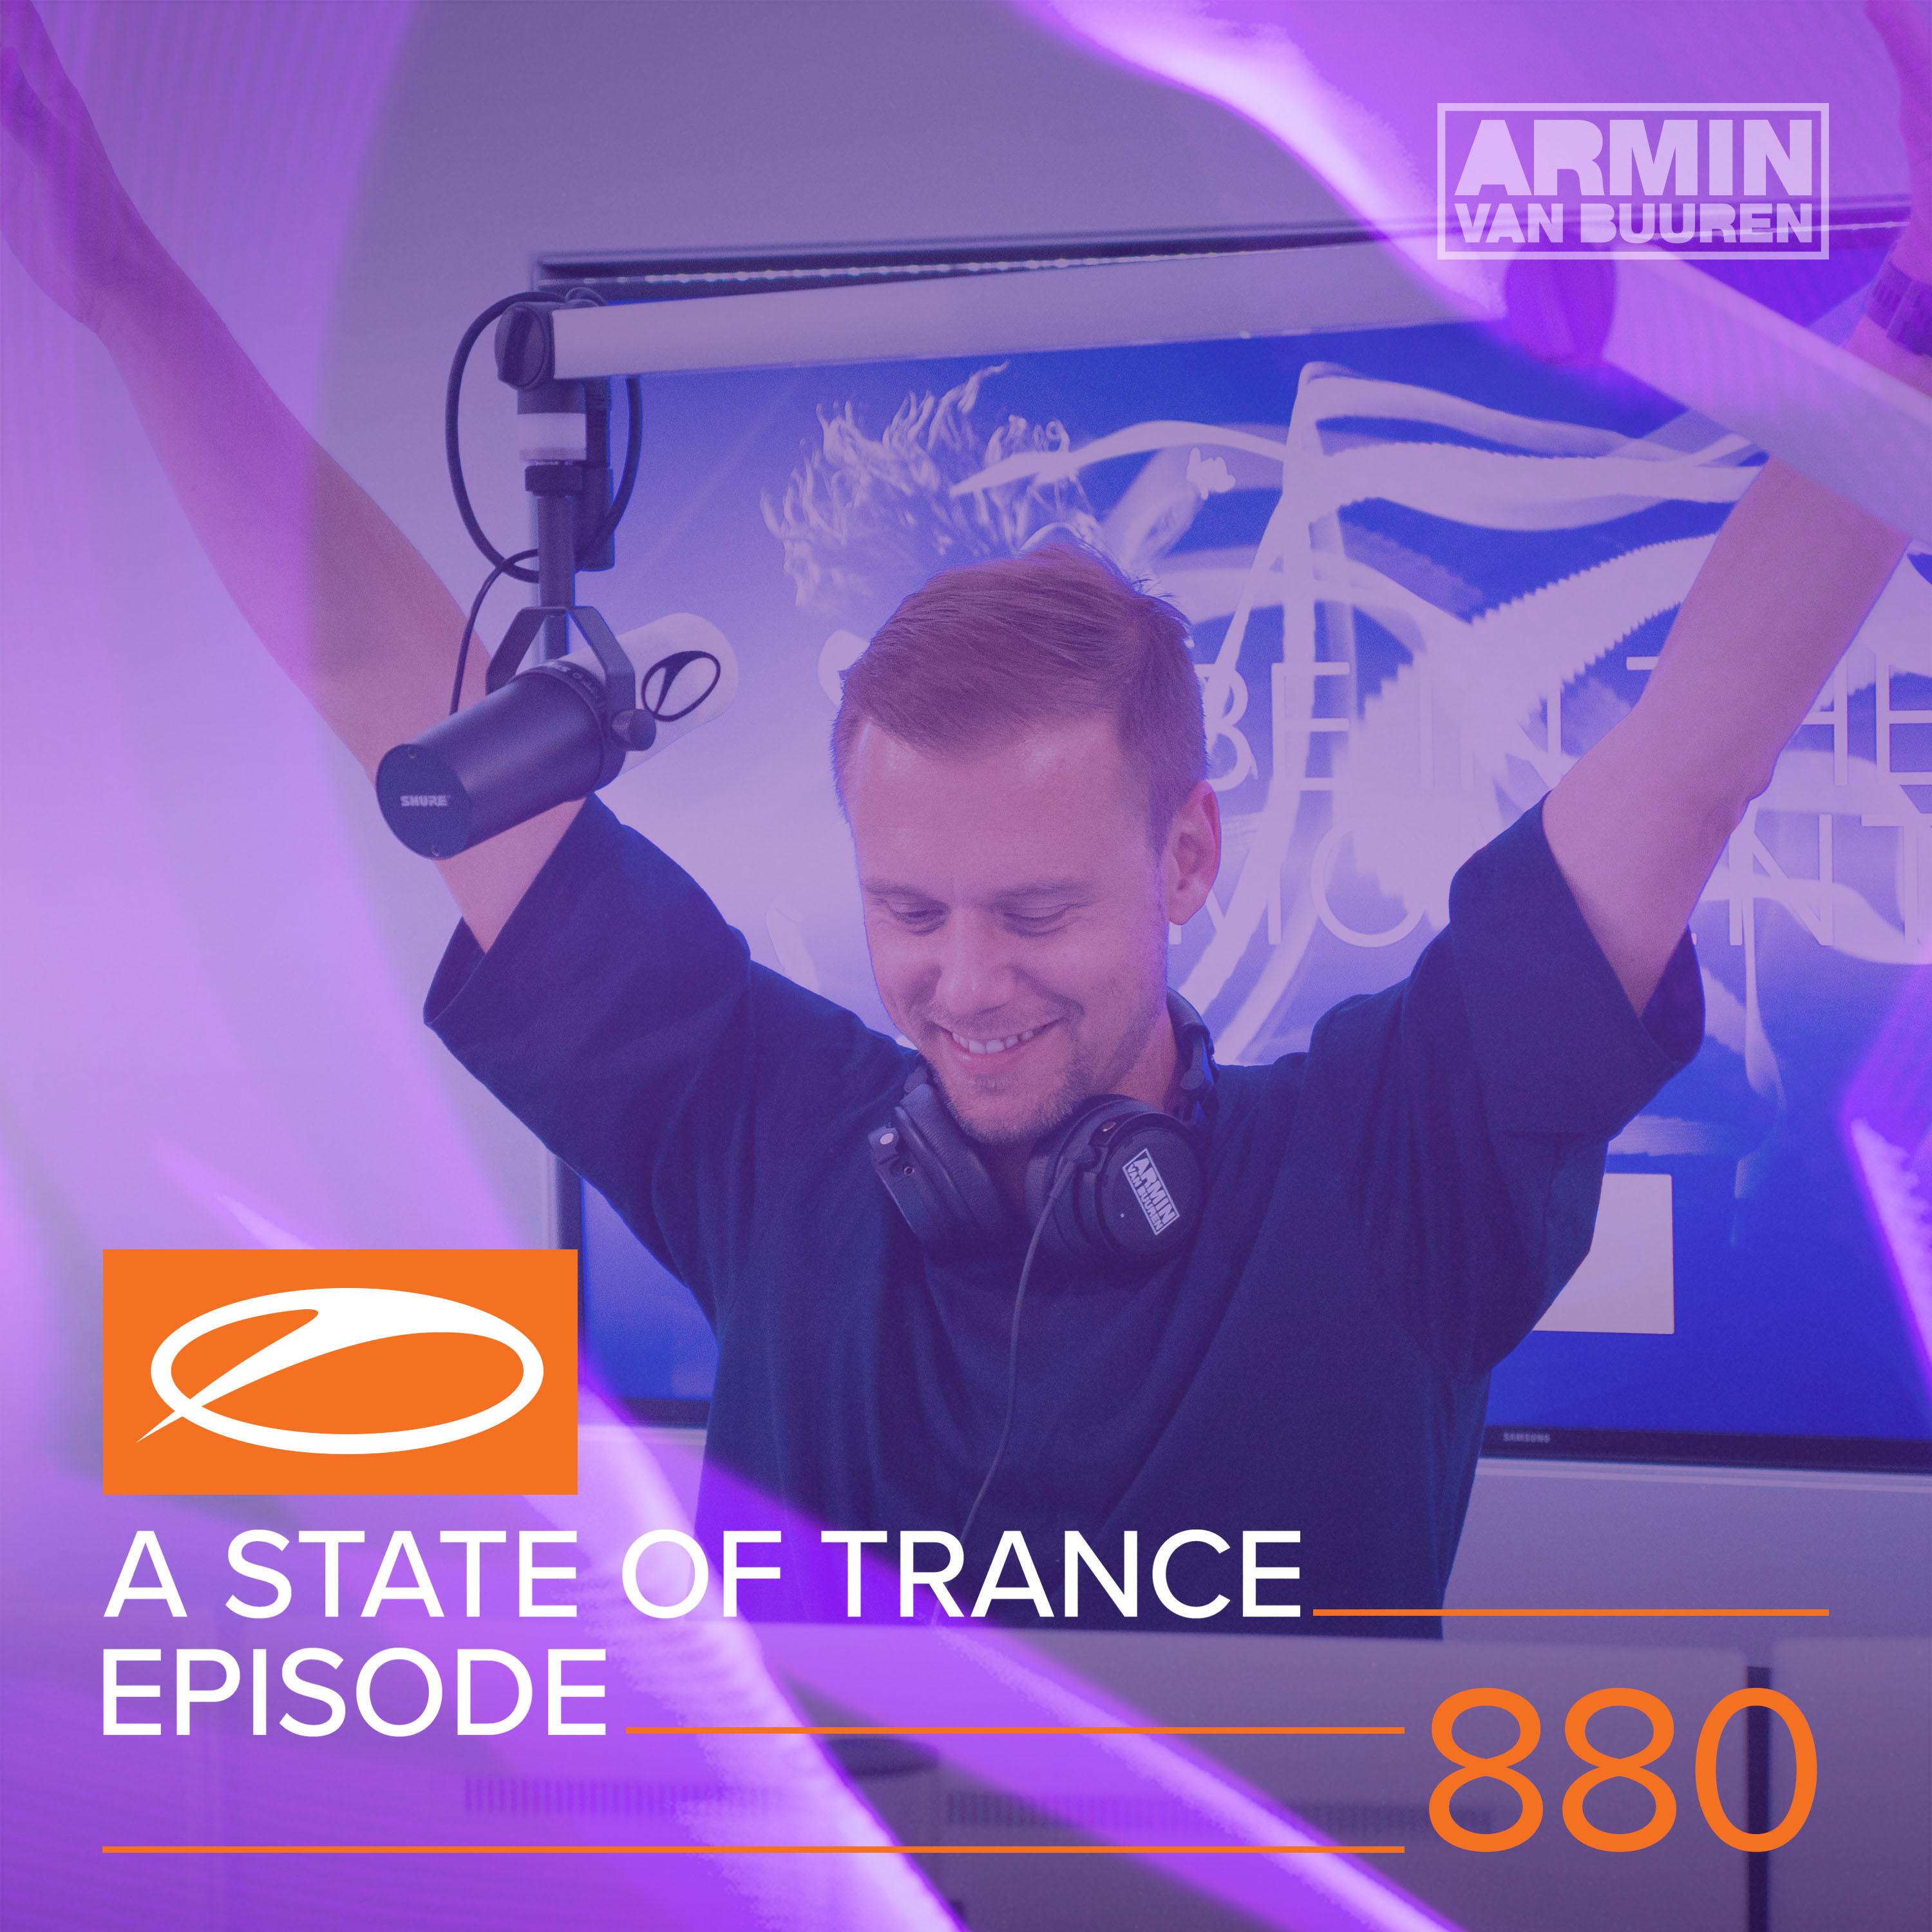 A State Of Trance (ASOT 880) (Coming Up, Pt. 3)